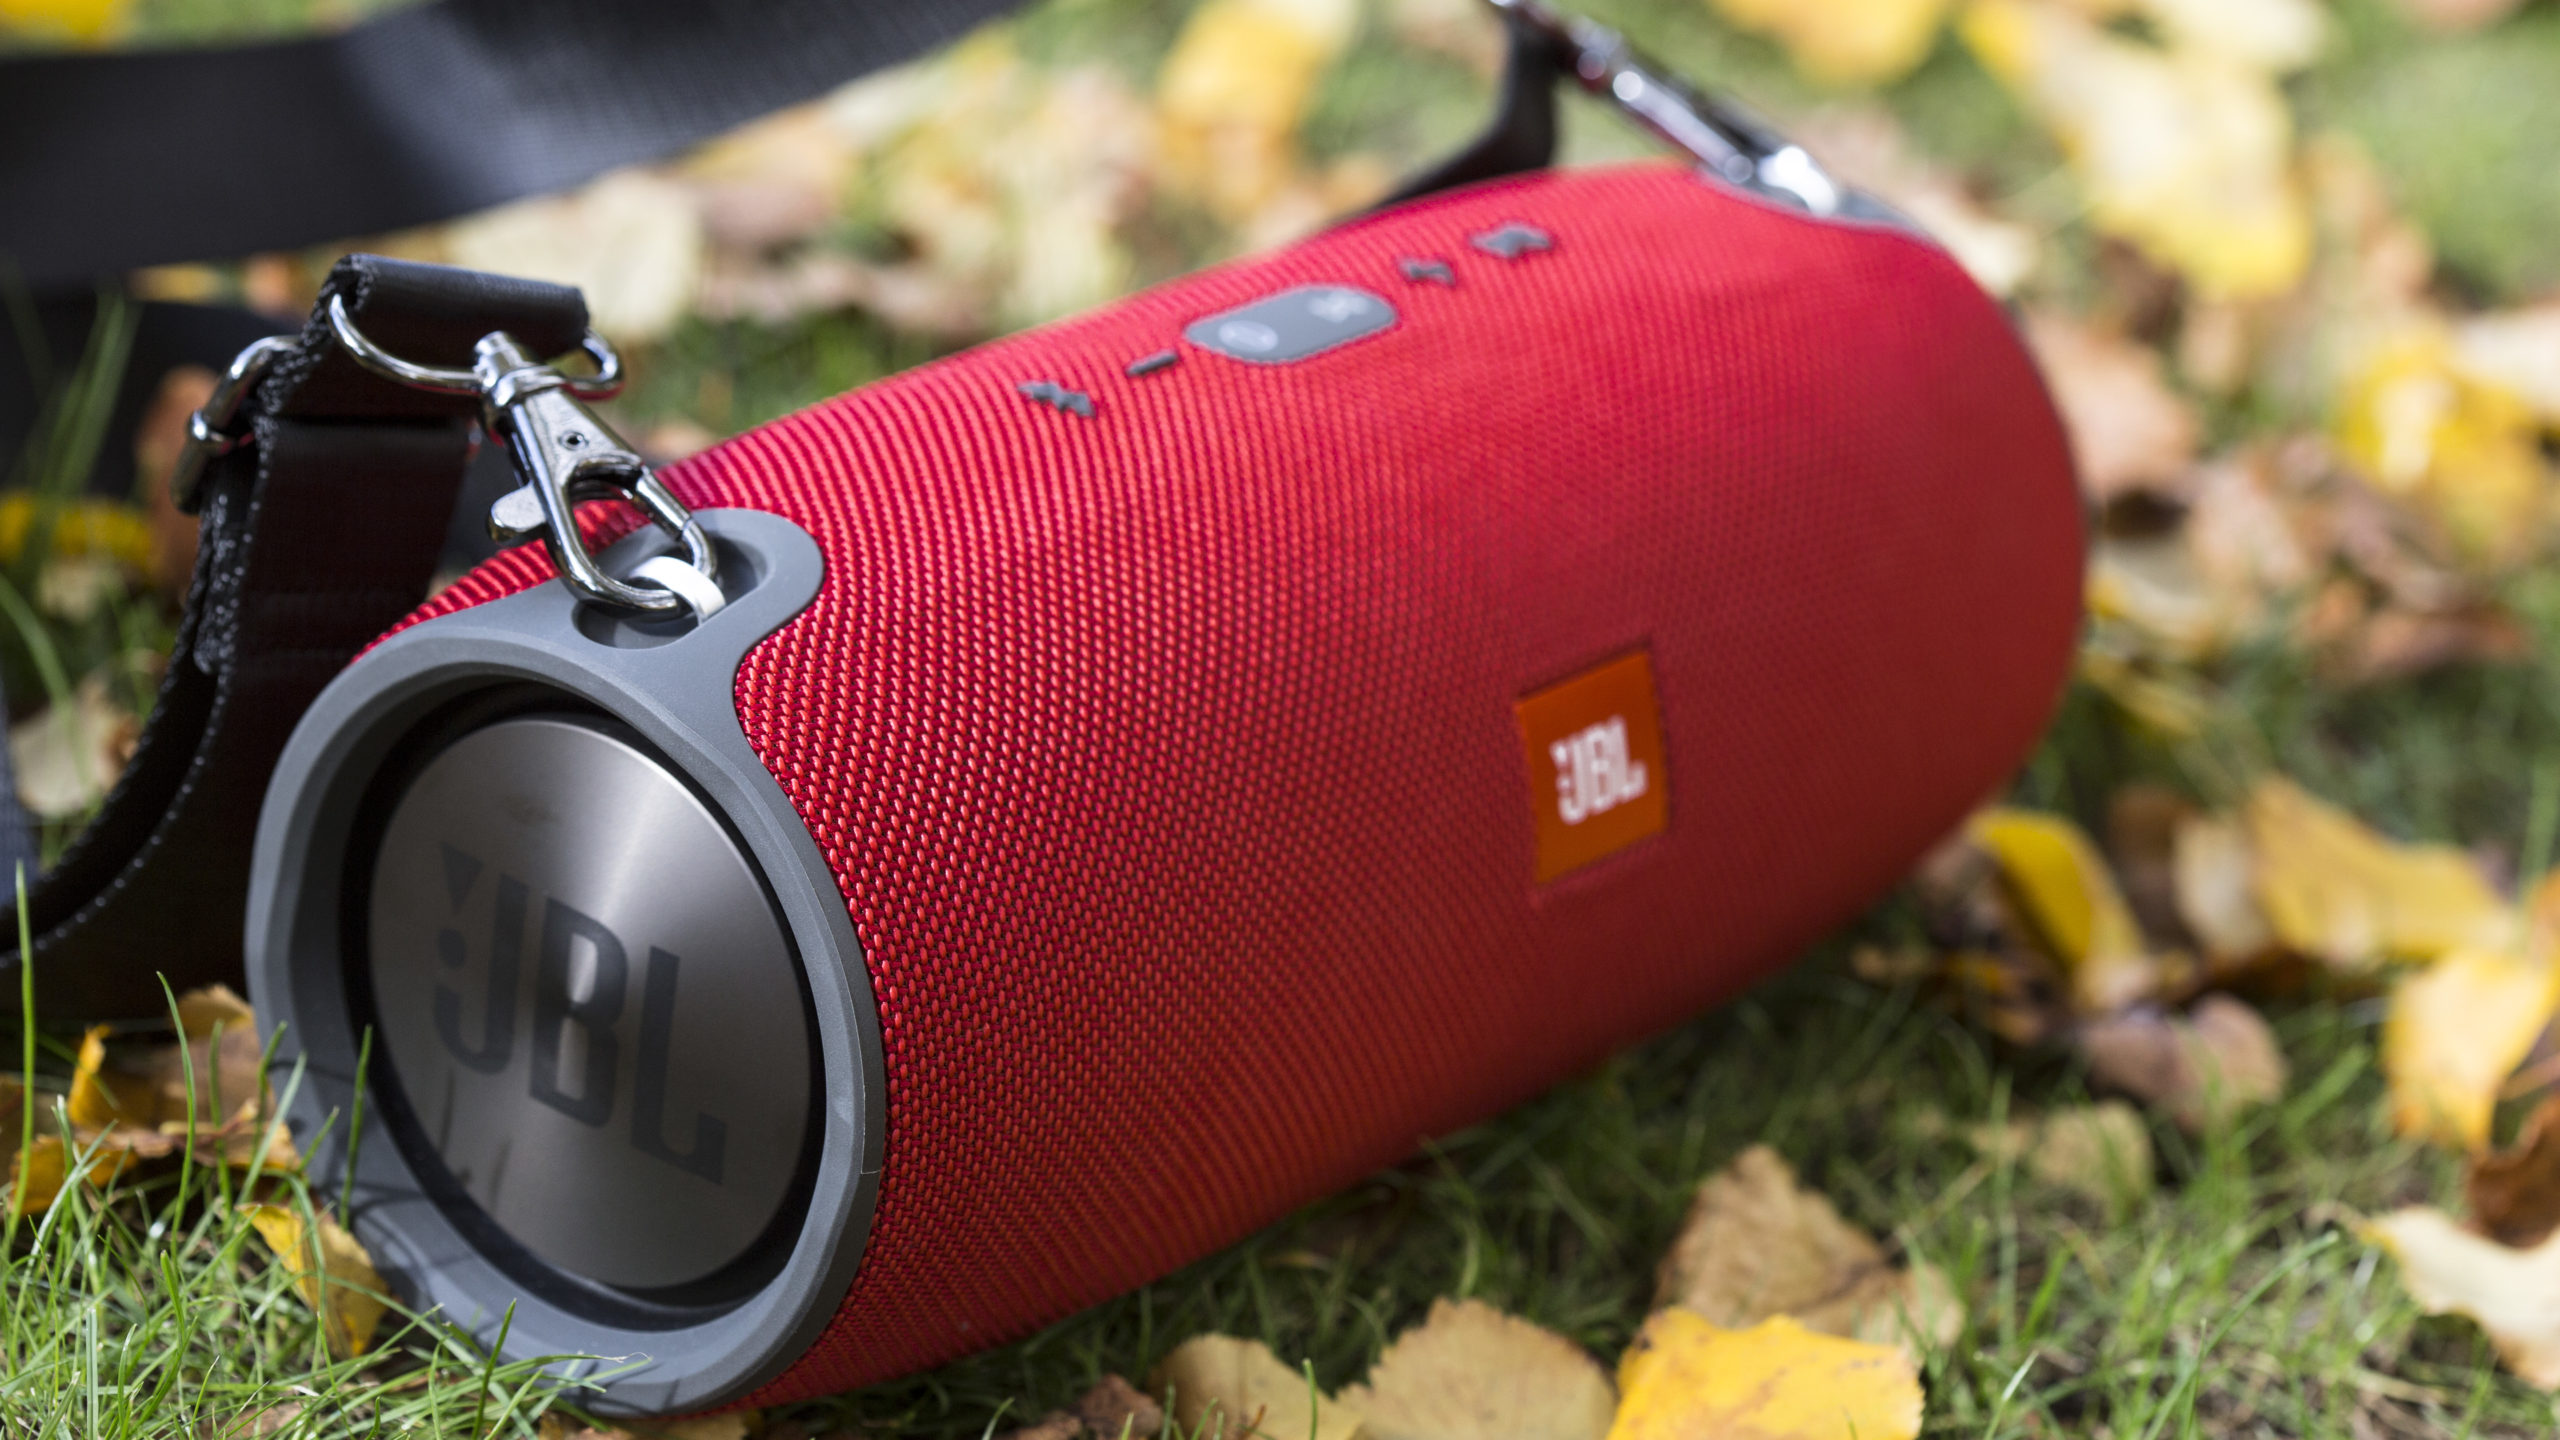 JBL review: Get the party started